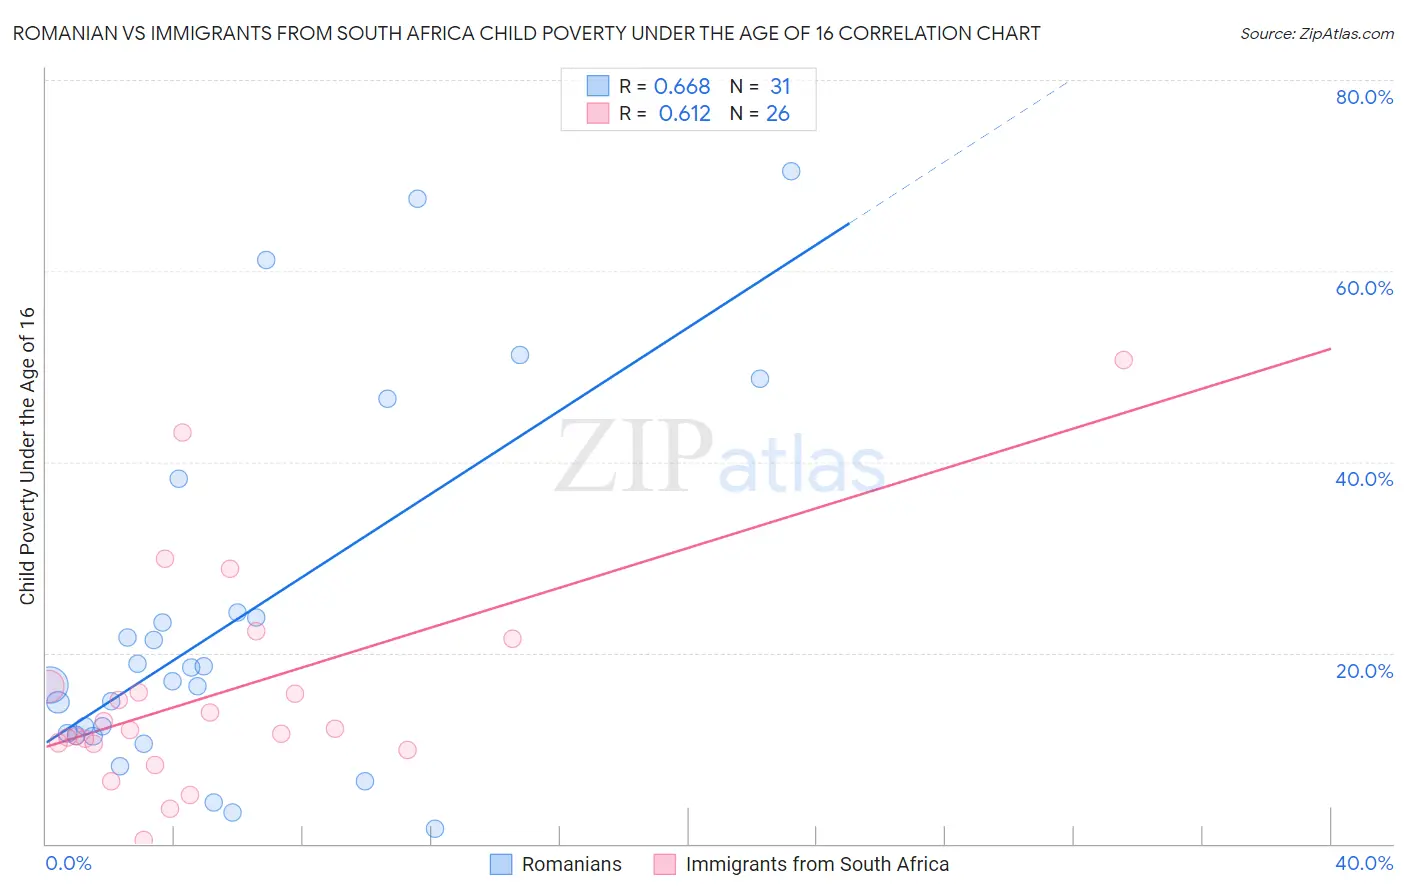 Romanian vs Immigrants from South Africa Child Poverty Under the Age of 16